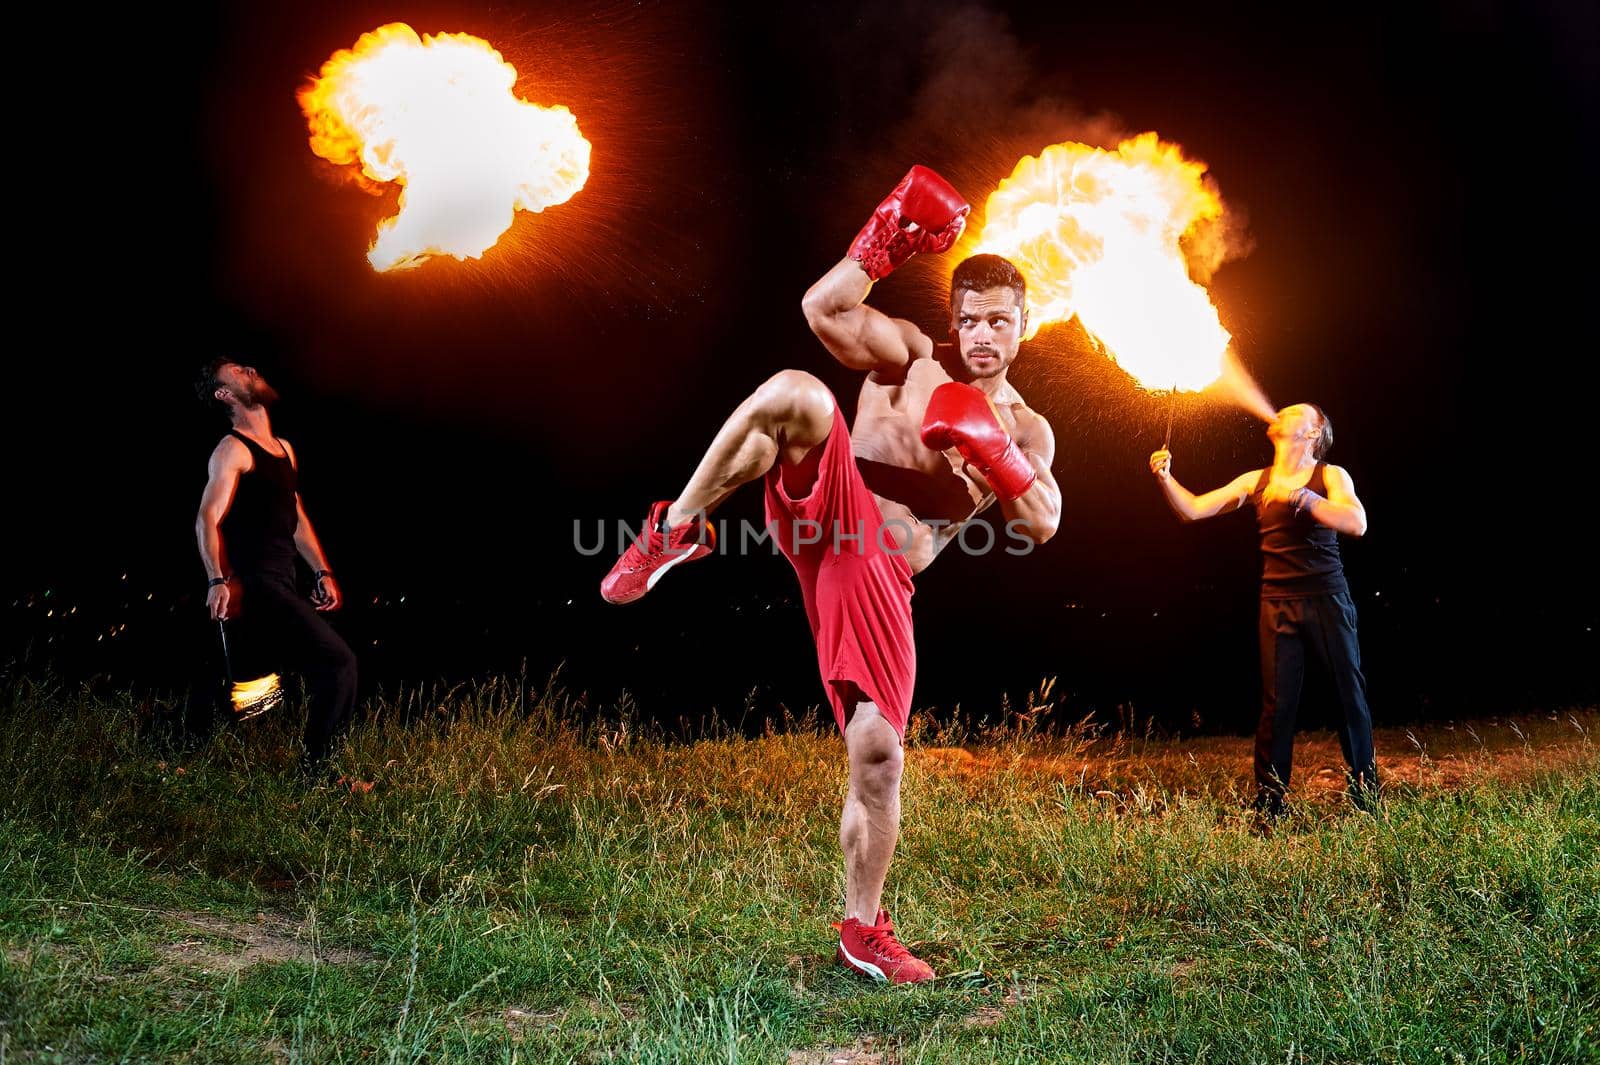 Professional kick boxer practicing outdoors at night fire eaters blowing fire from their mouths on the background creative extreme fiery artists performance champion winning training sports fitness.